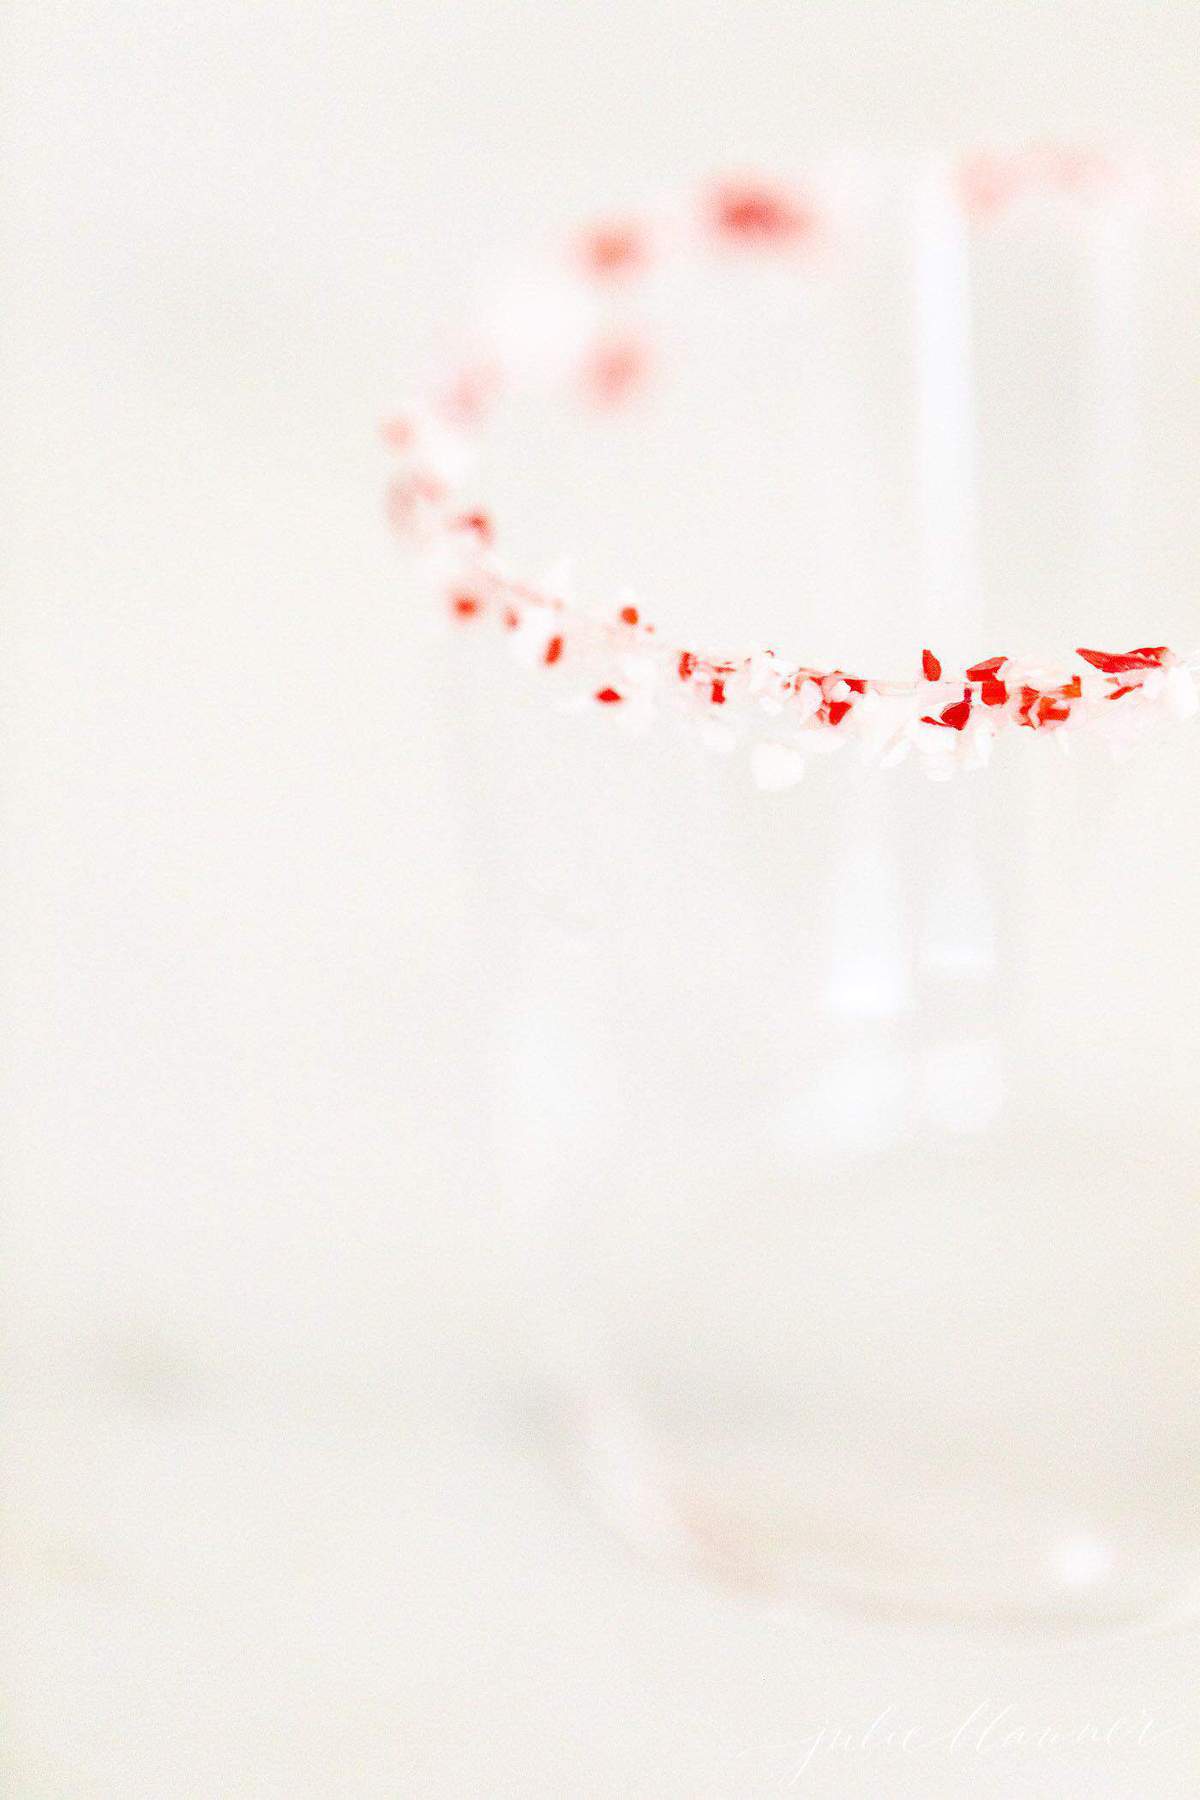 Close up shot of a clear glass rimmed with crushed peppermint.